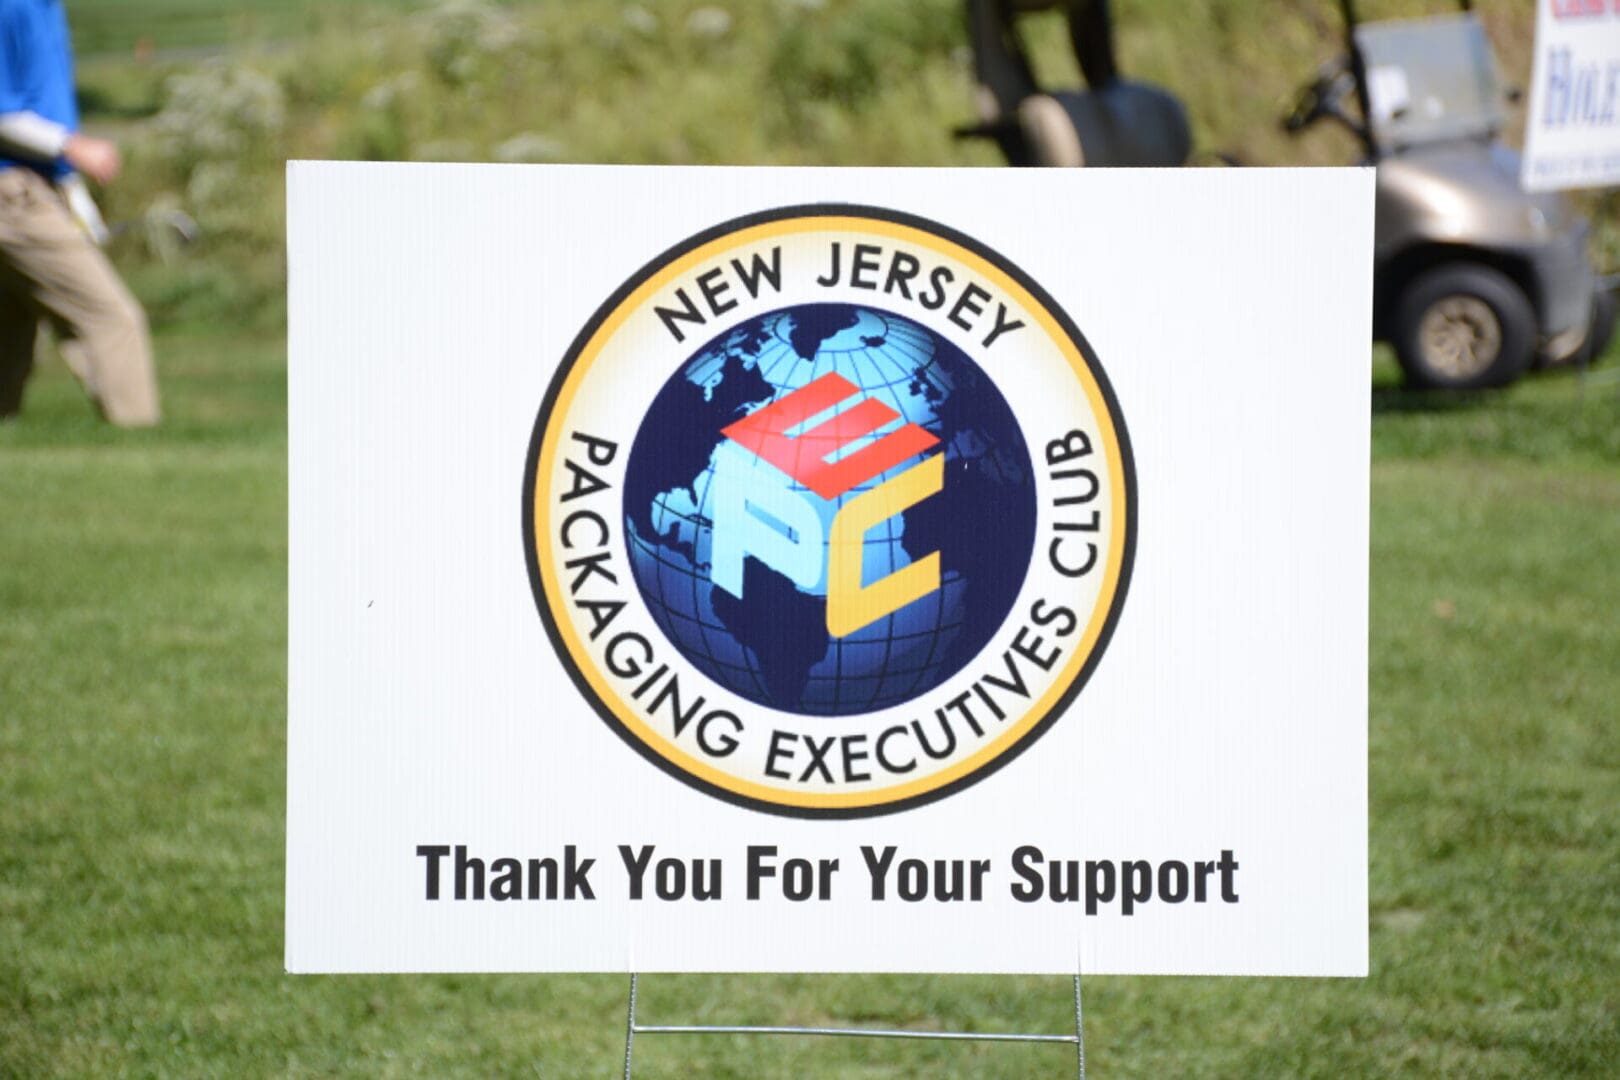 New jersey club jacking executives thank you for your support.